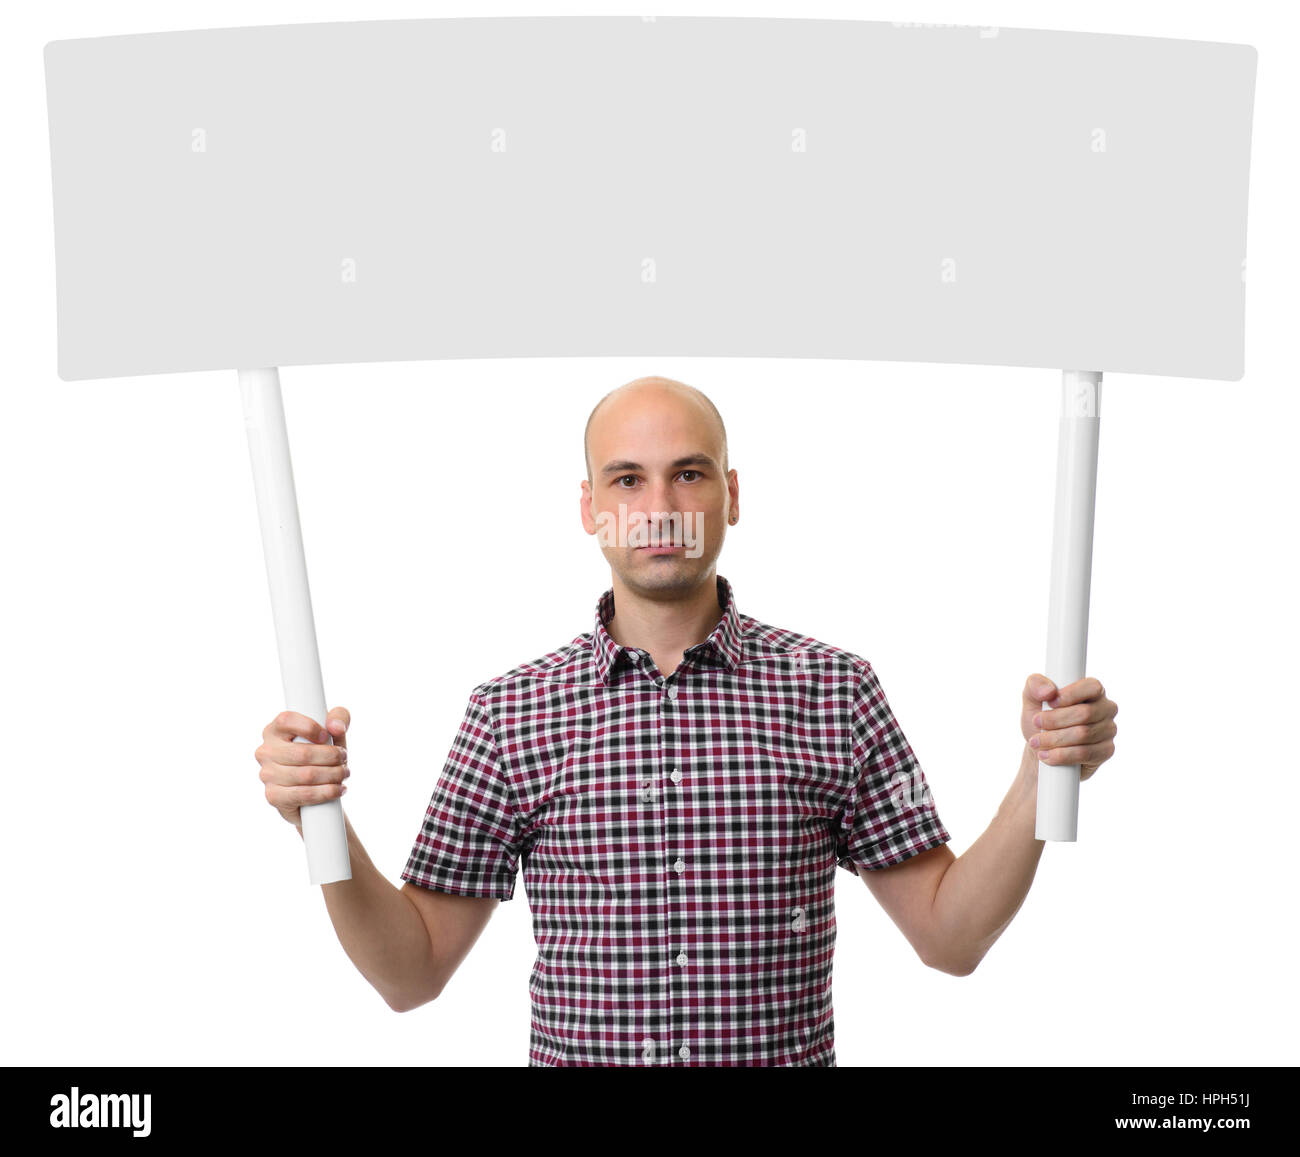 Man holding protest sign. Demonstration concept. Isolated over white background Stock Photo